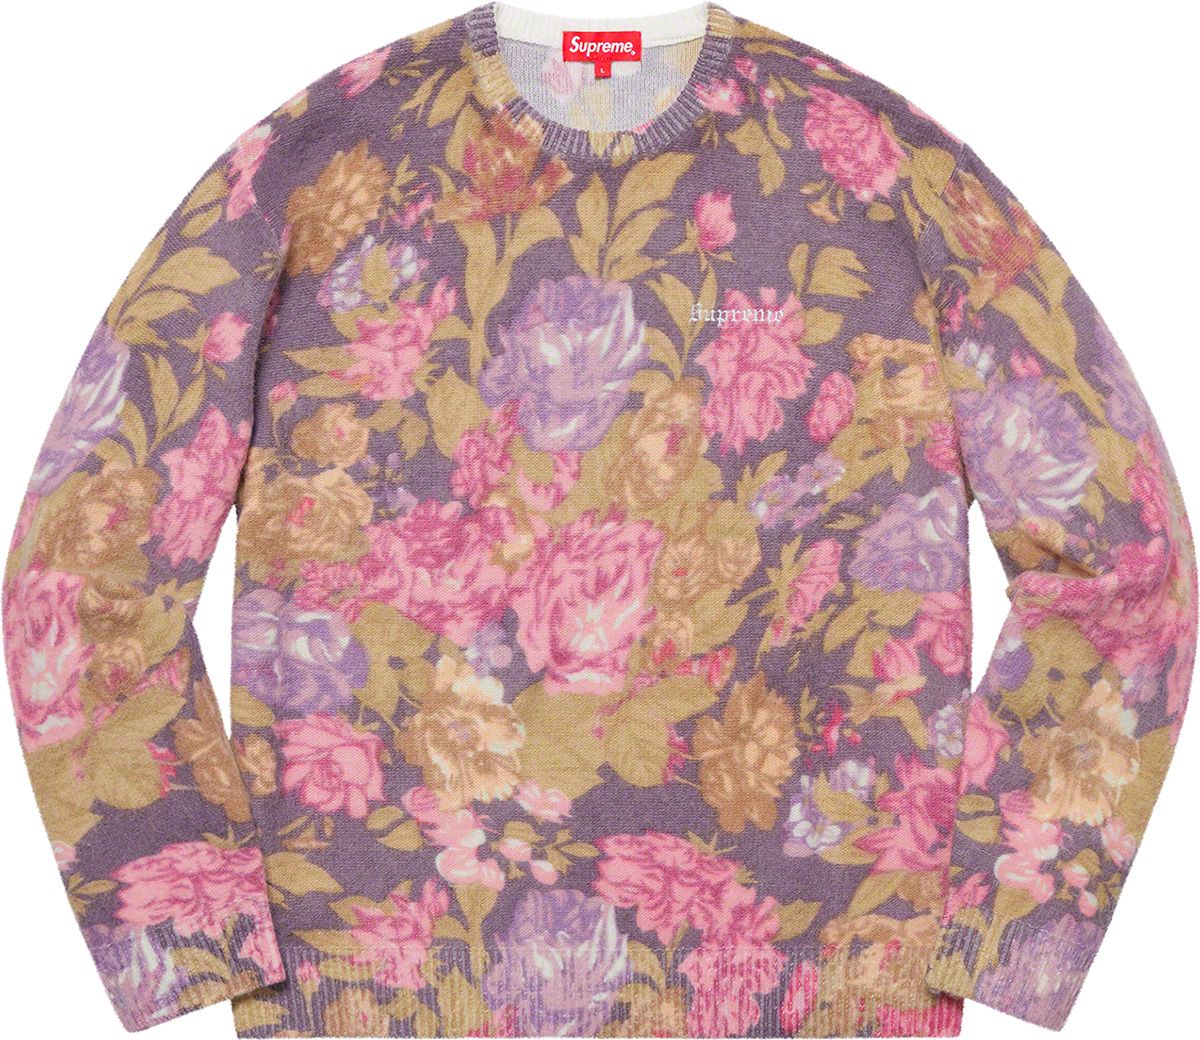 Printed Floral Angora Sweater - Spring/Summer 2019 Preview – Supreme